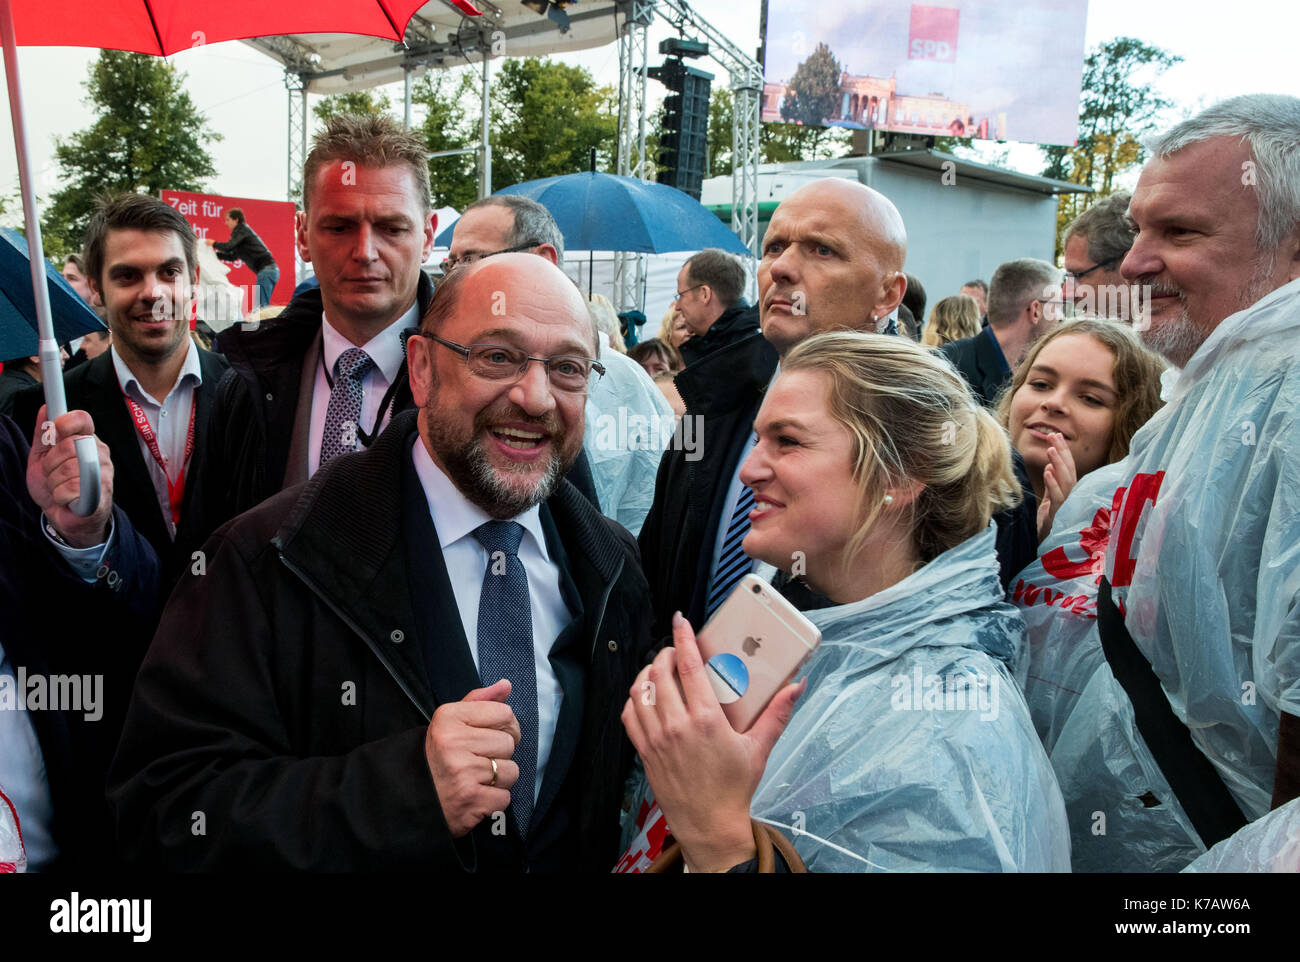 Schwerin, Germany. 15th Sep, 2017. Martin Schulz, candidate for chancellorship from the Social Democratic Party of Germany (SPD), being greeted by supporters after an election campaign event with an audience of 400 people in Schwerin, Germany, 15 September 2017. Photo: Jens Büttner/dpa-Zentralbild/dpa/Alamy Live News Stock Photo